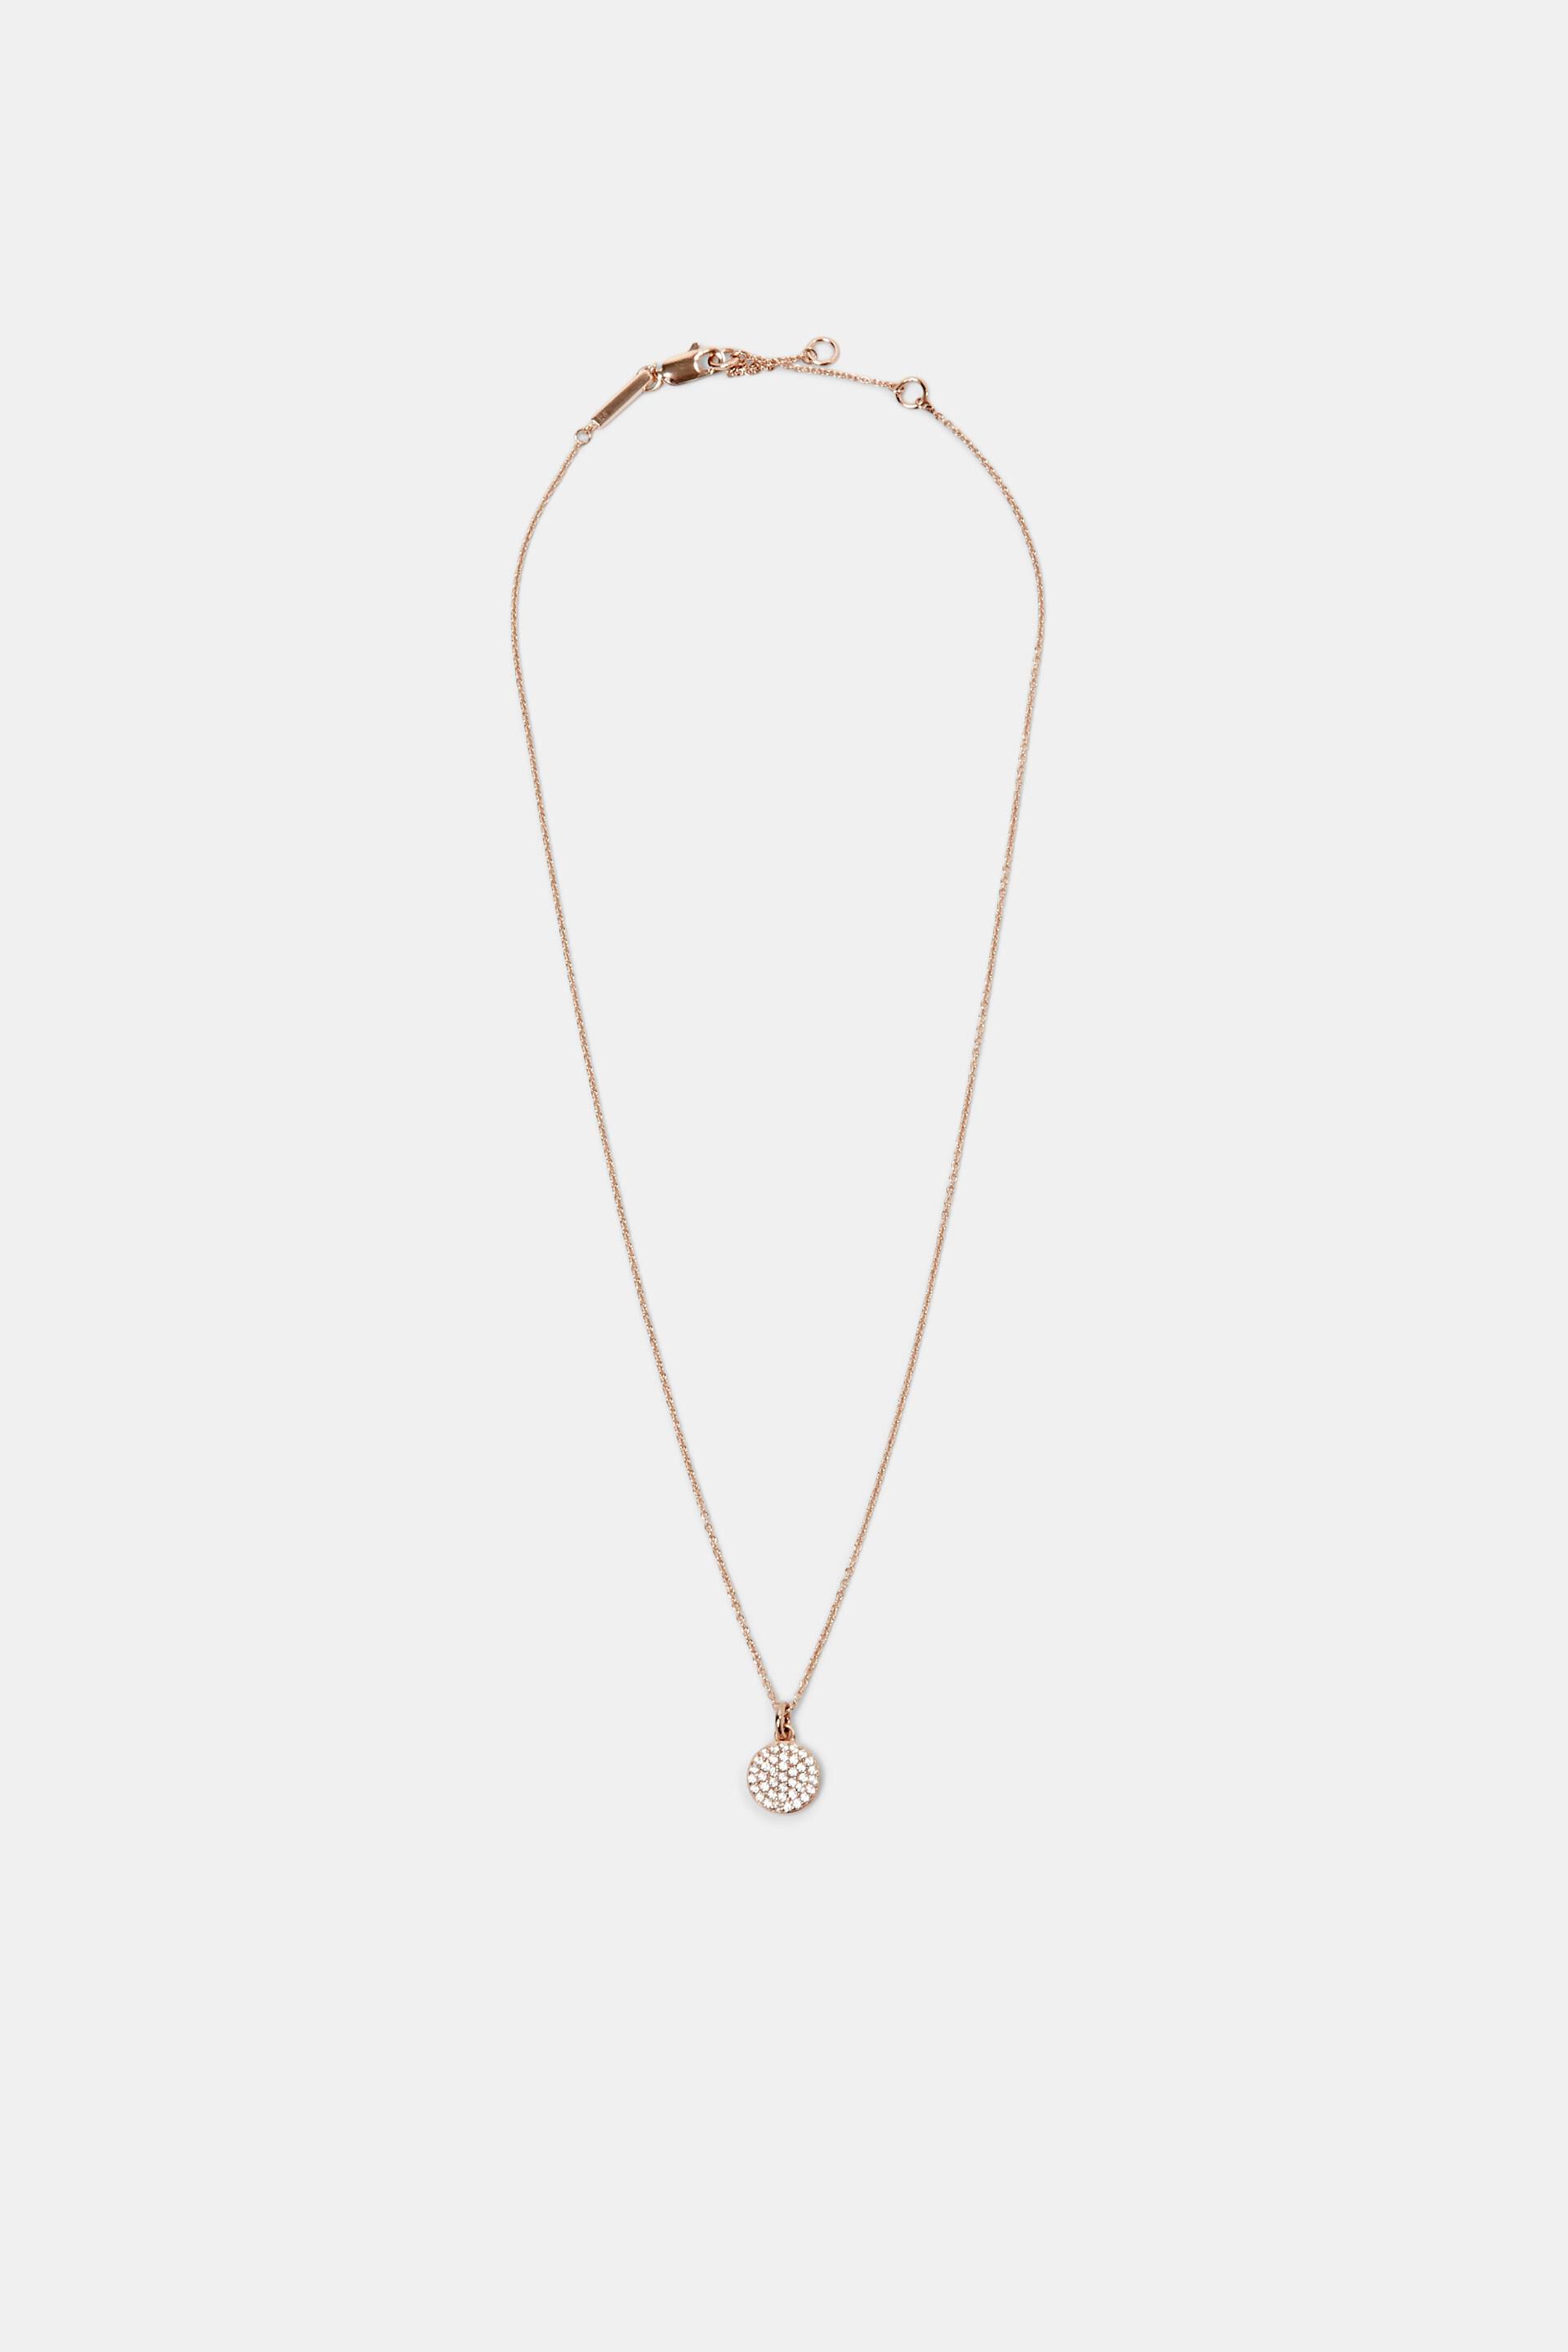 Esprit sterling Necklace silver with zirconia pendant,